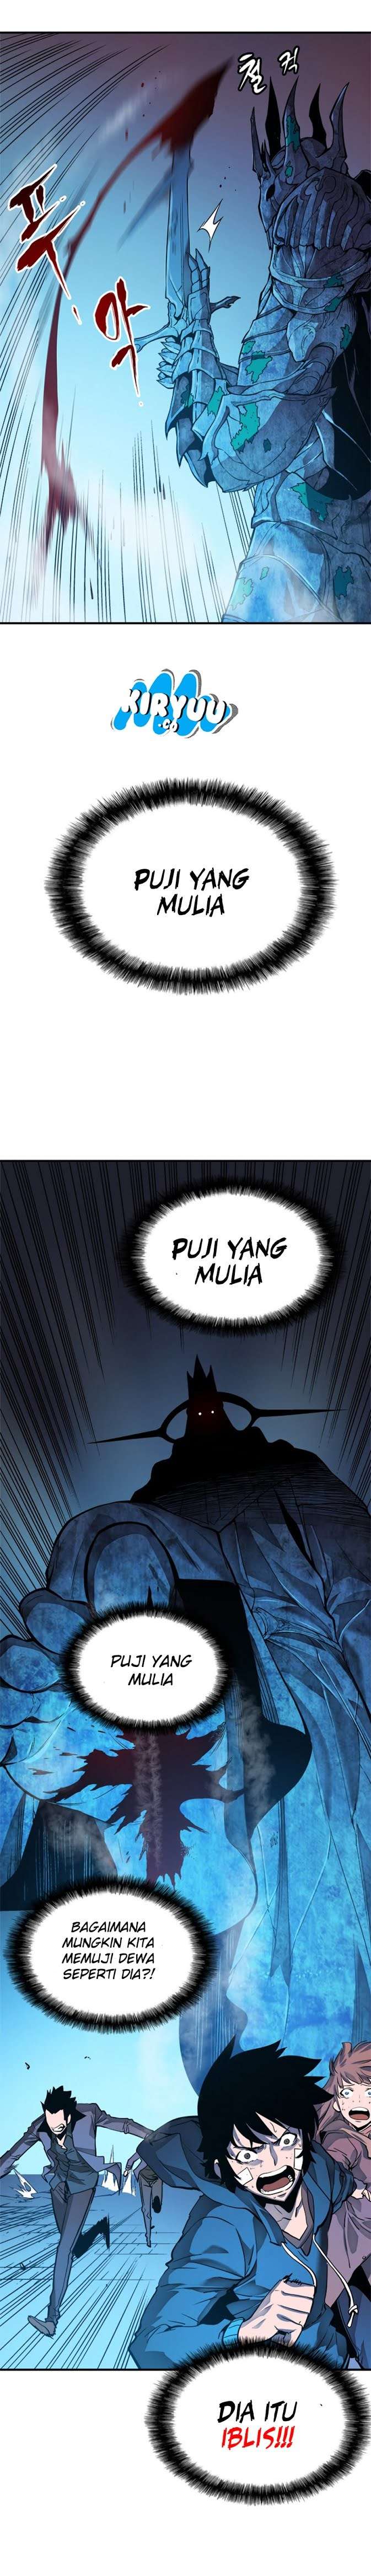 Solo Leveling Chapter 7 Bahasa Indonesia